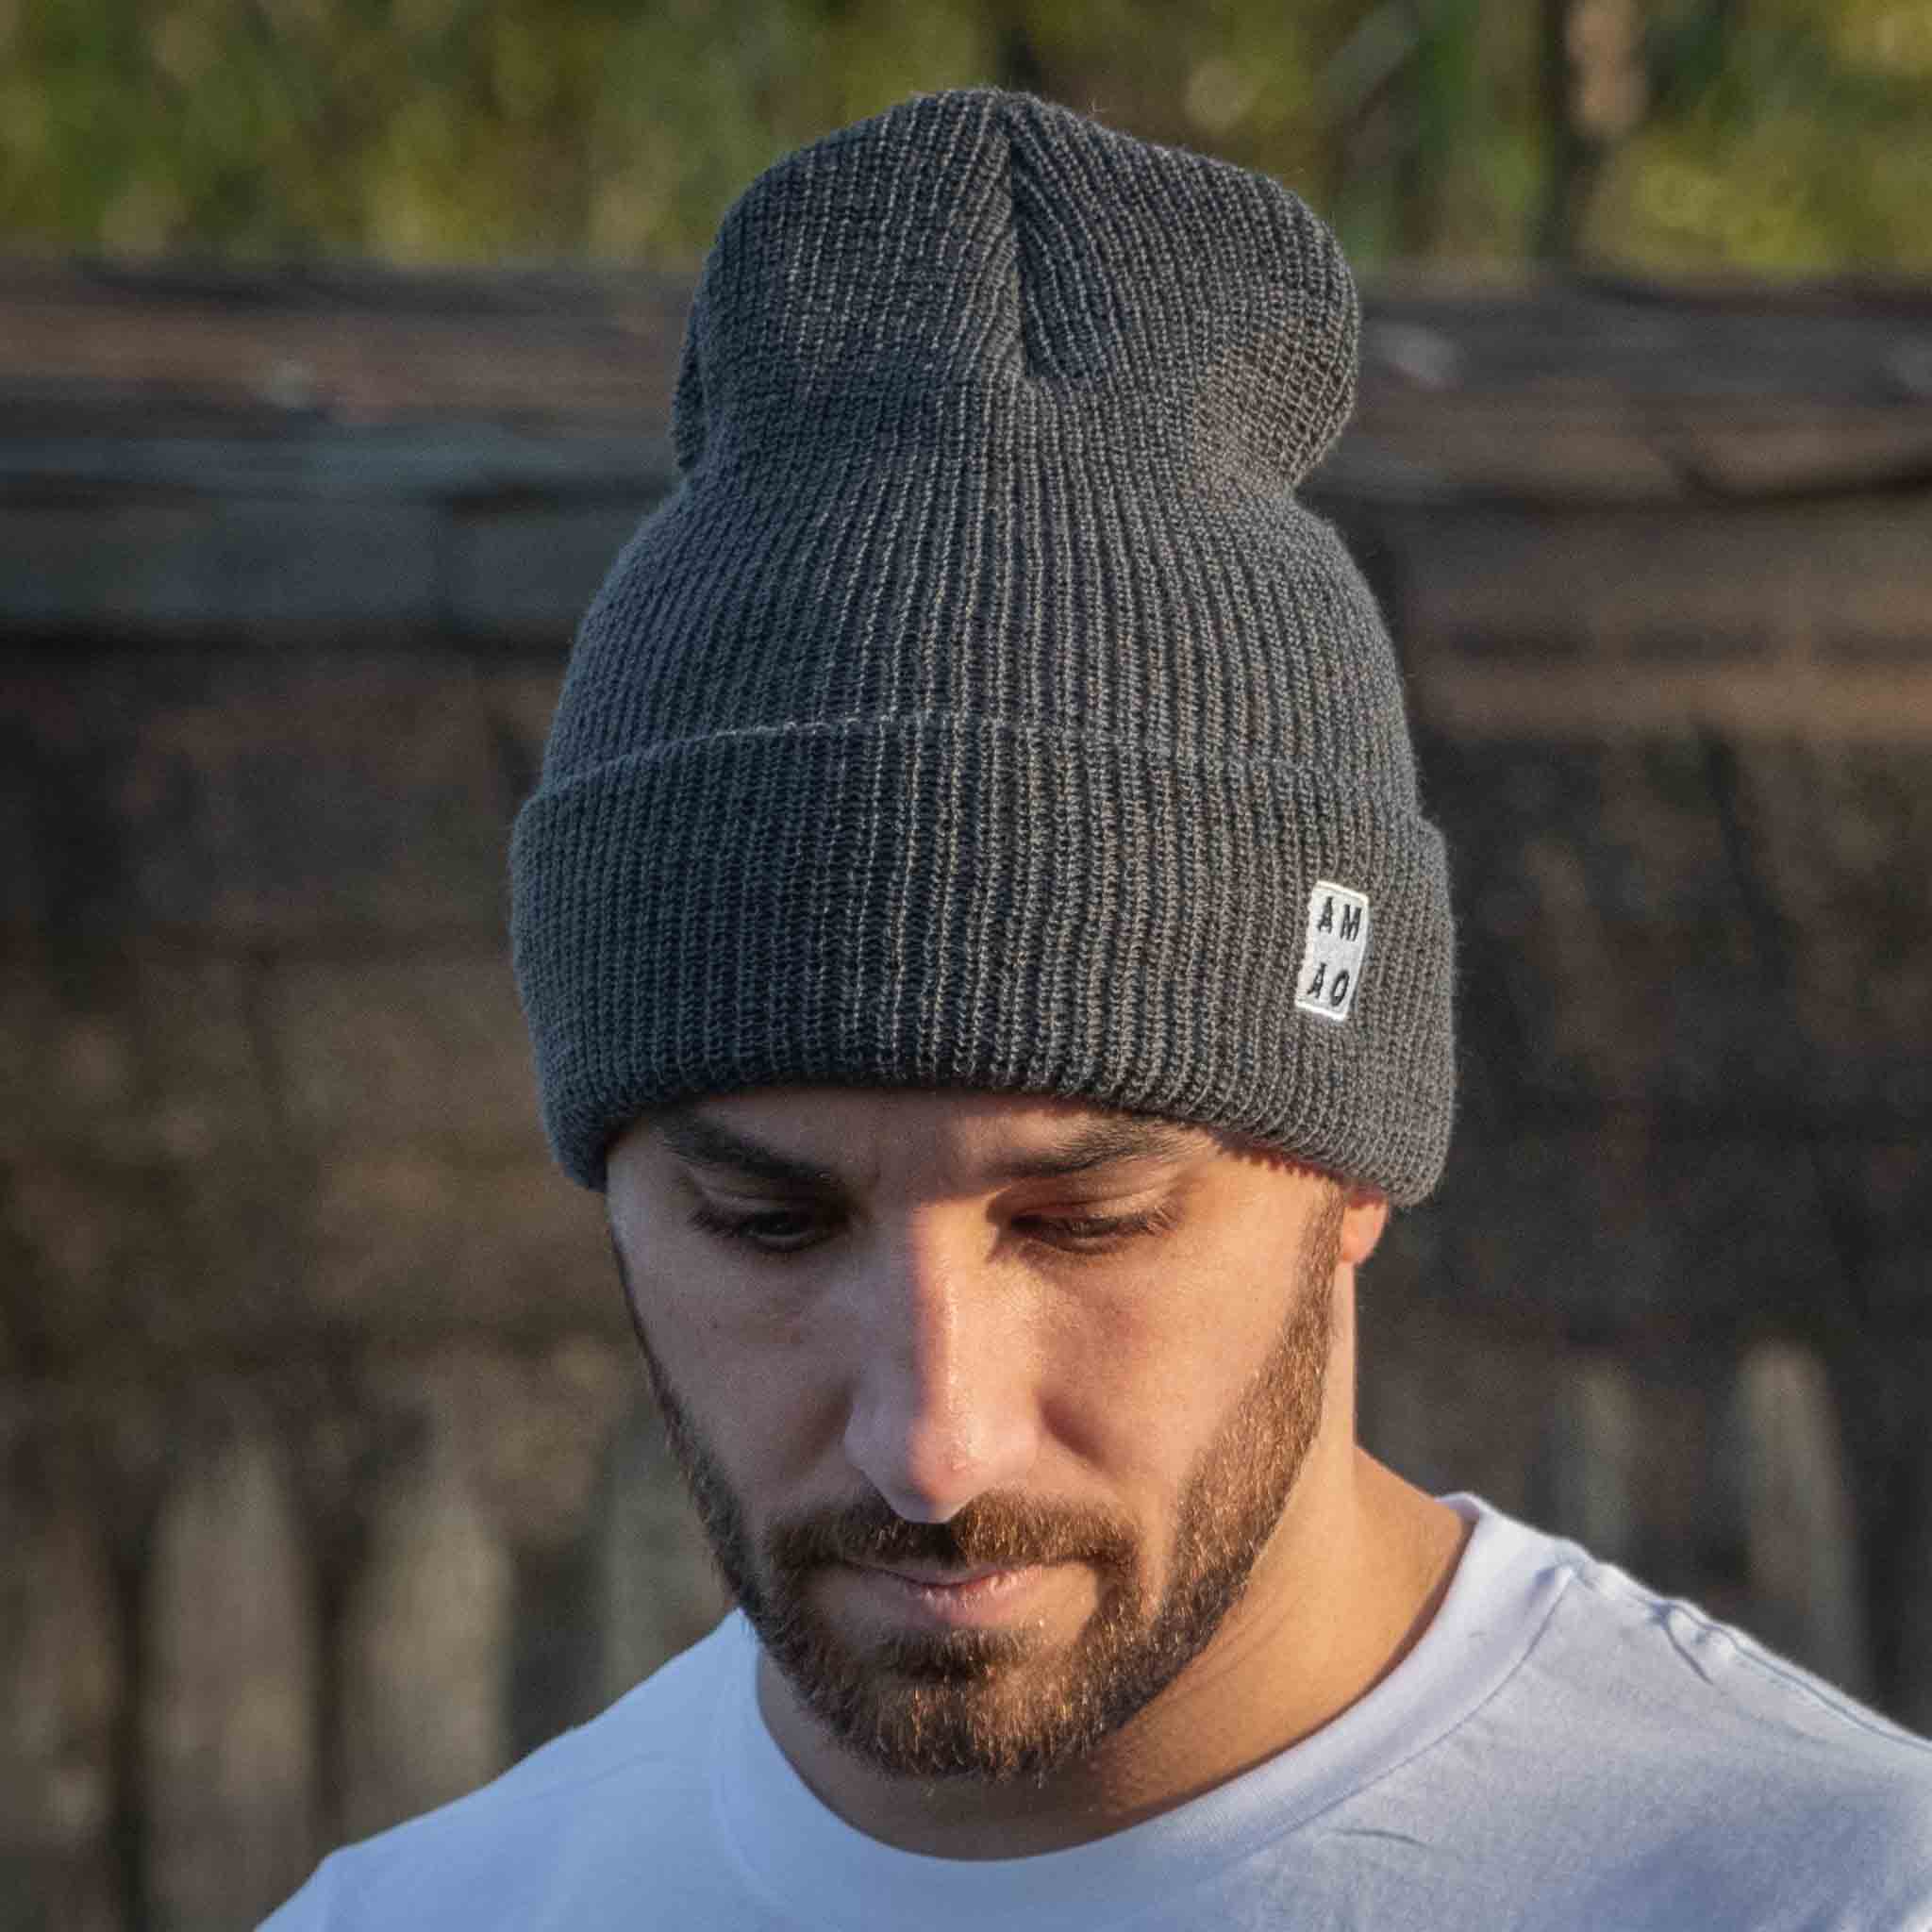 AMAO Wool Workwear Knit Hat Grey - Compare at $60